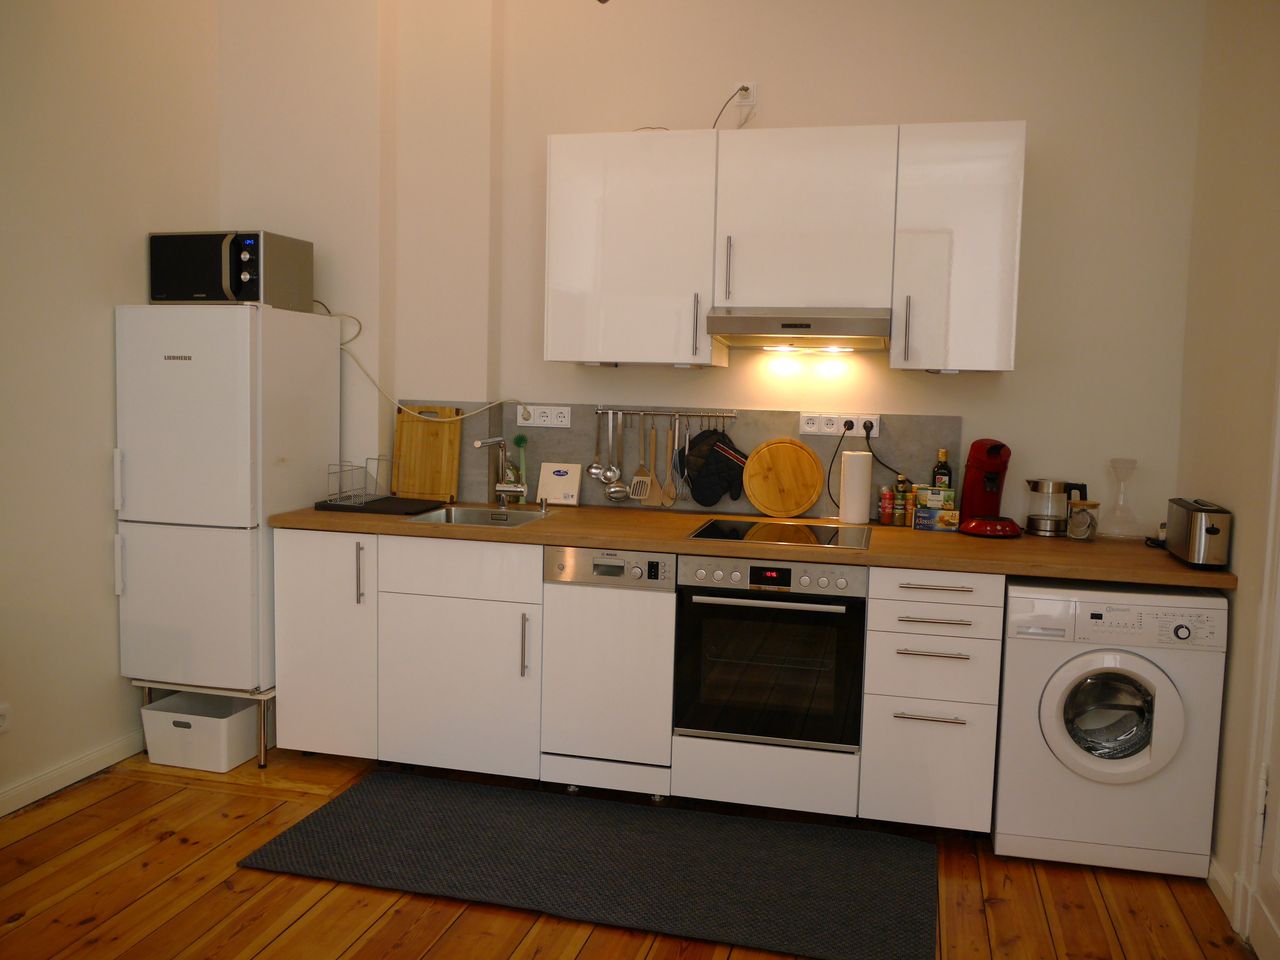 Renovated and lovingly furnished old building apartment in very quiet but central location